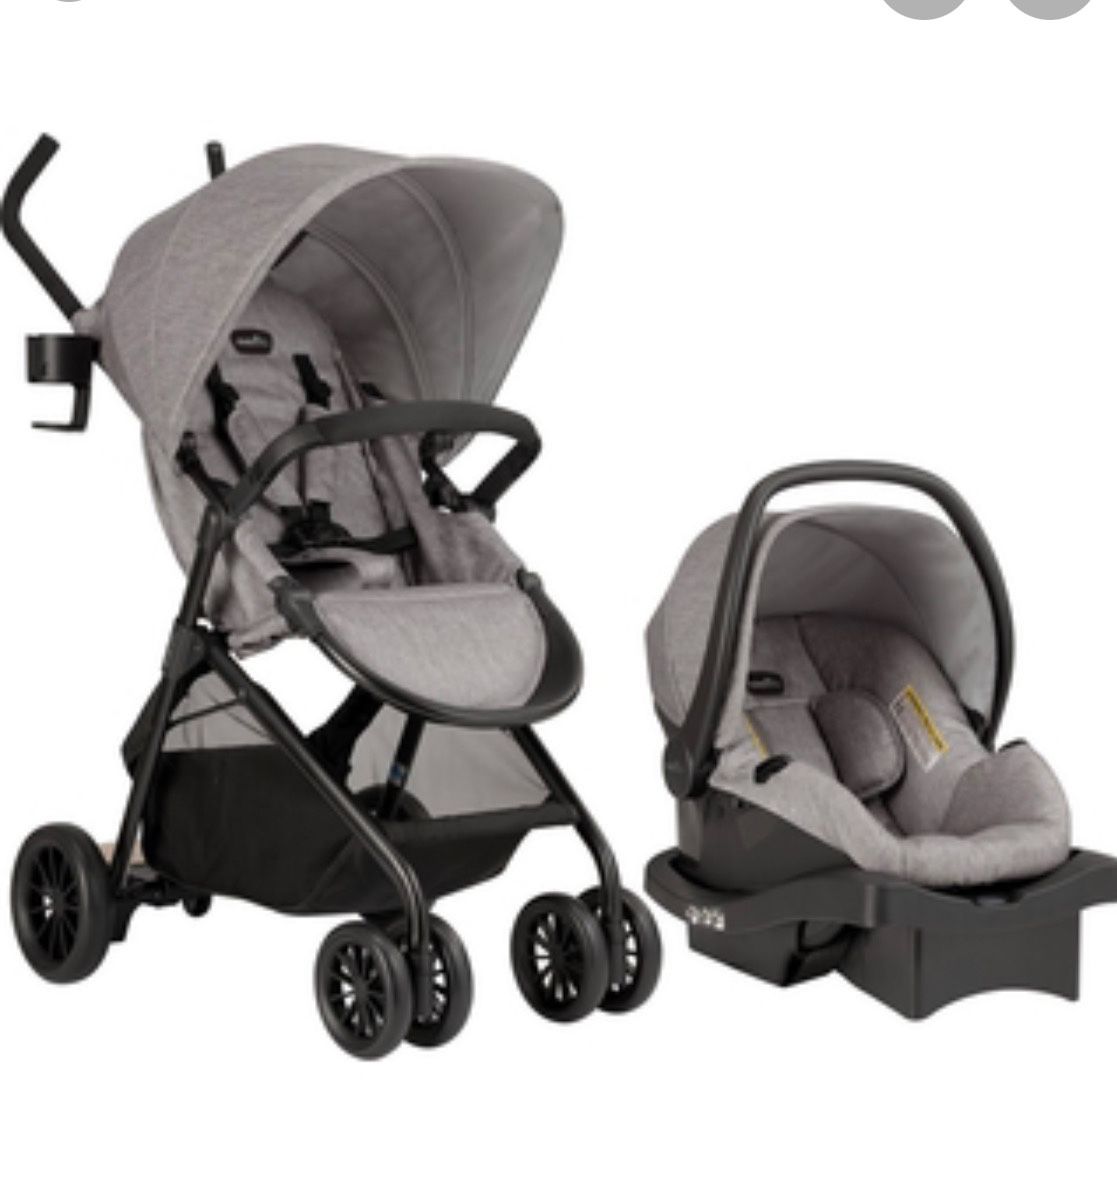 NEW! Even flow Sibby Travel system /Gray Mfg08/19 Good For 10 Years